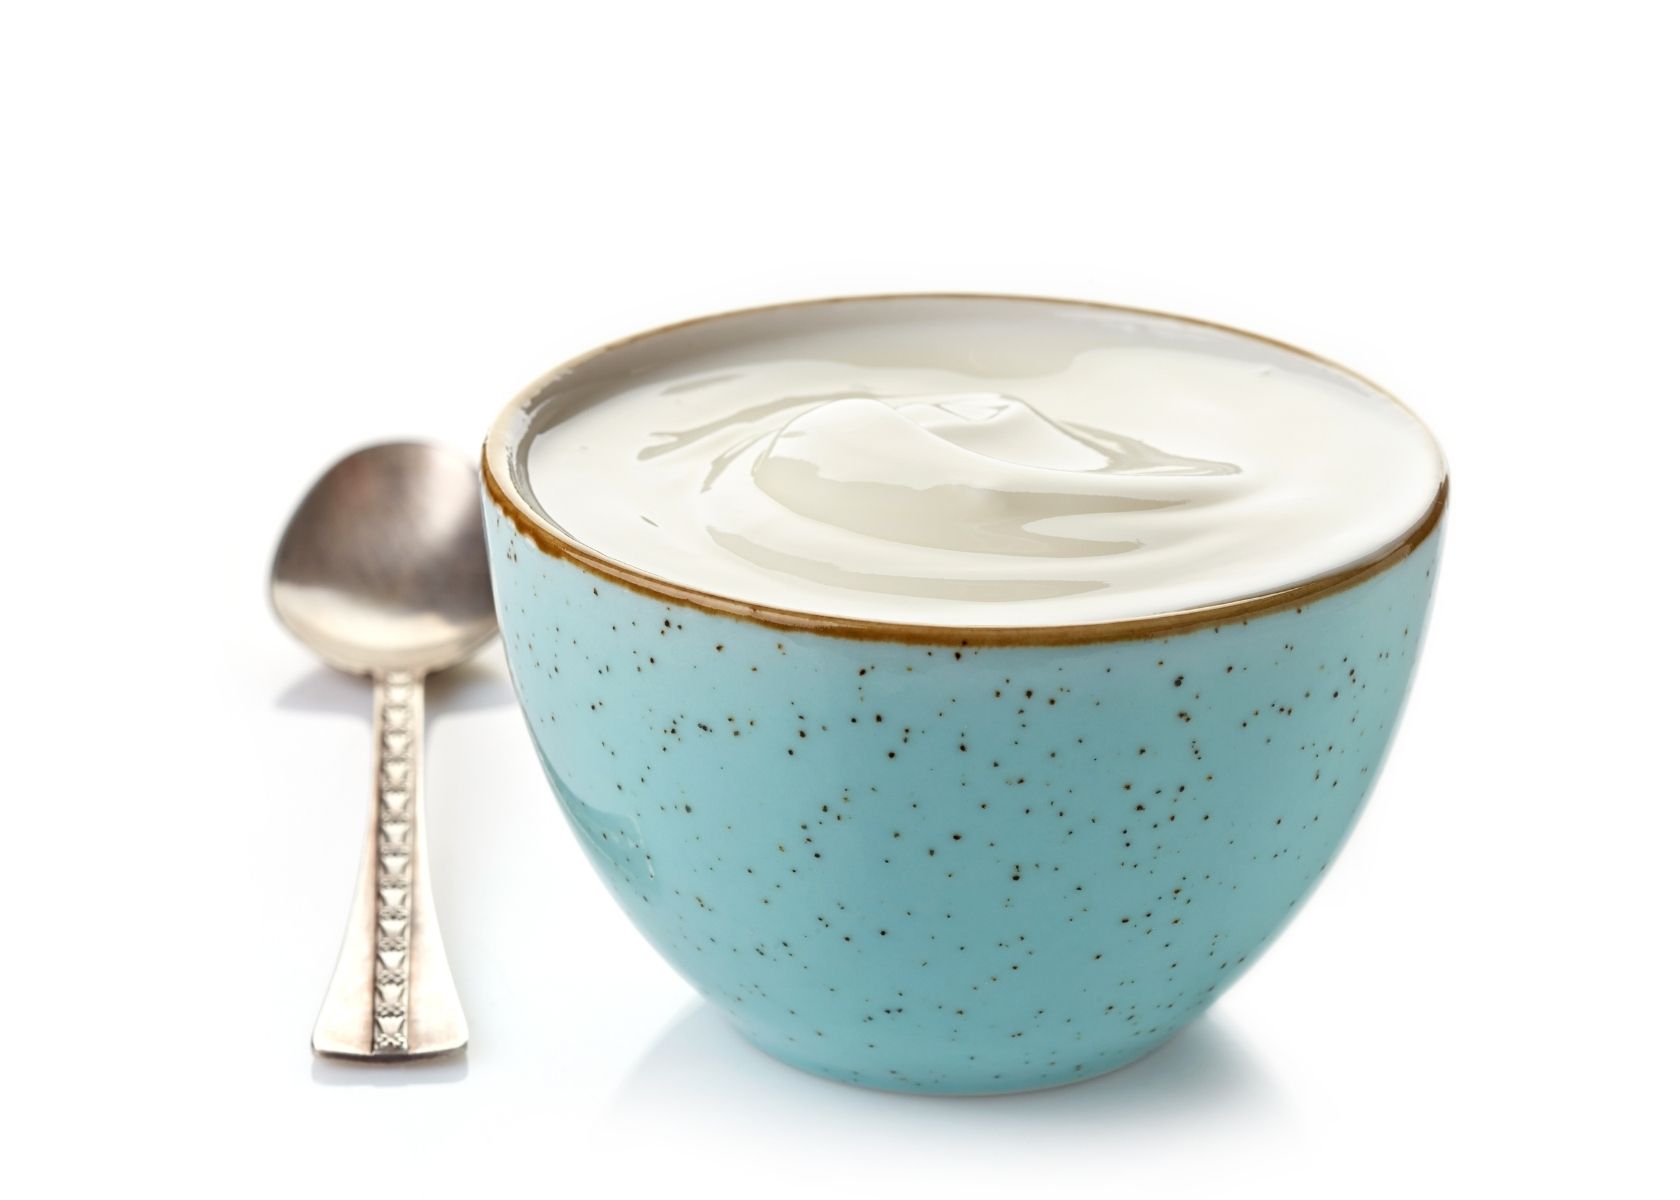 Plain yogurt in blue bowl with brown speckles next to metal spoon.